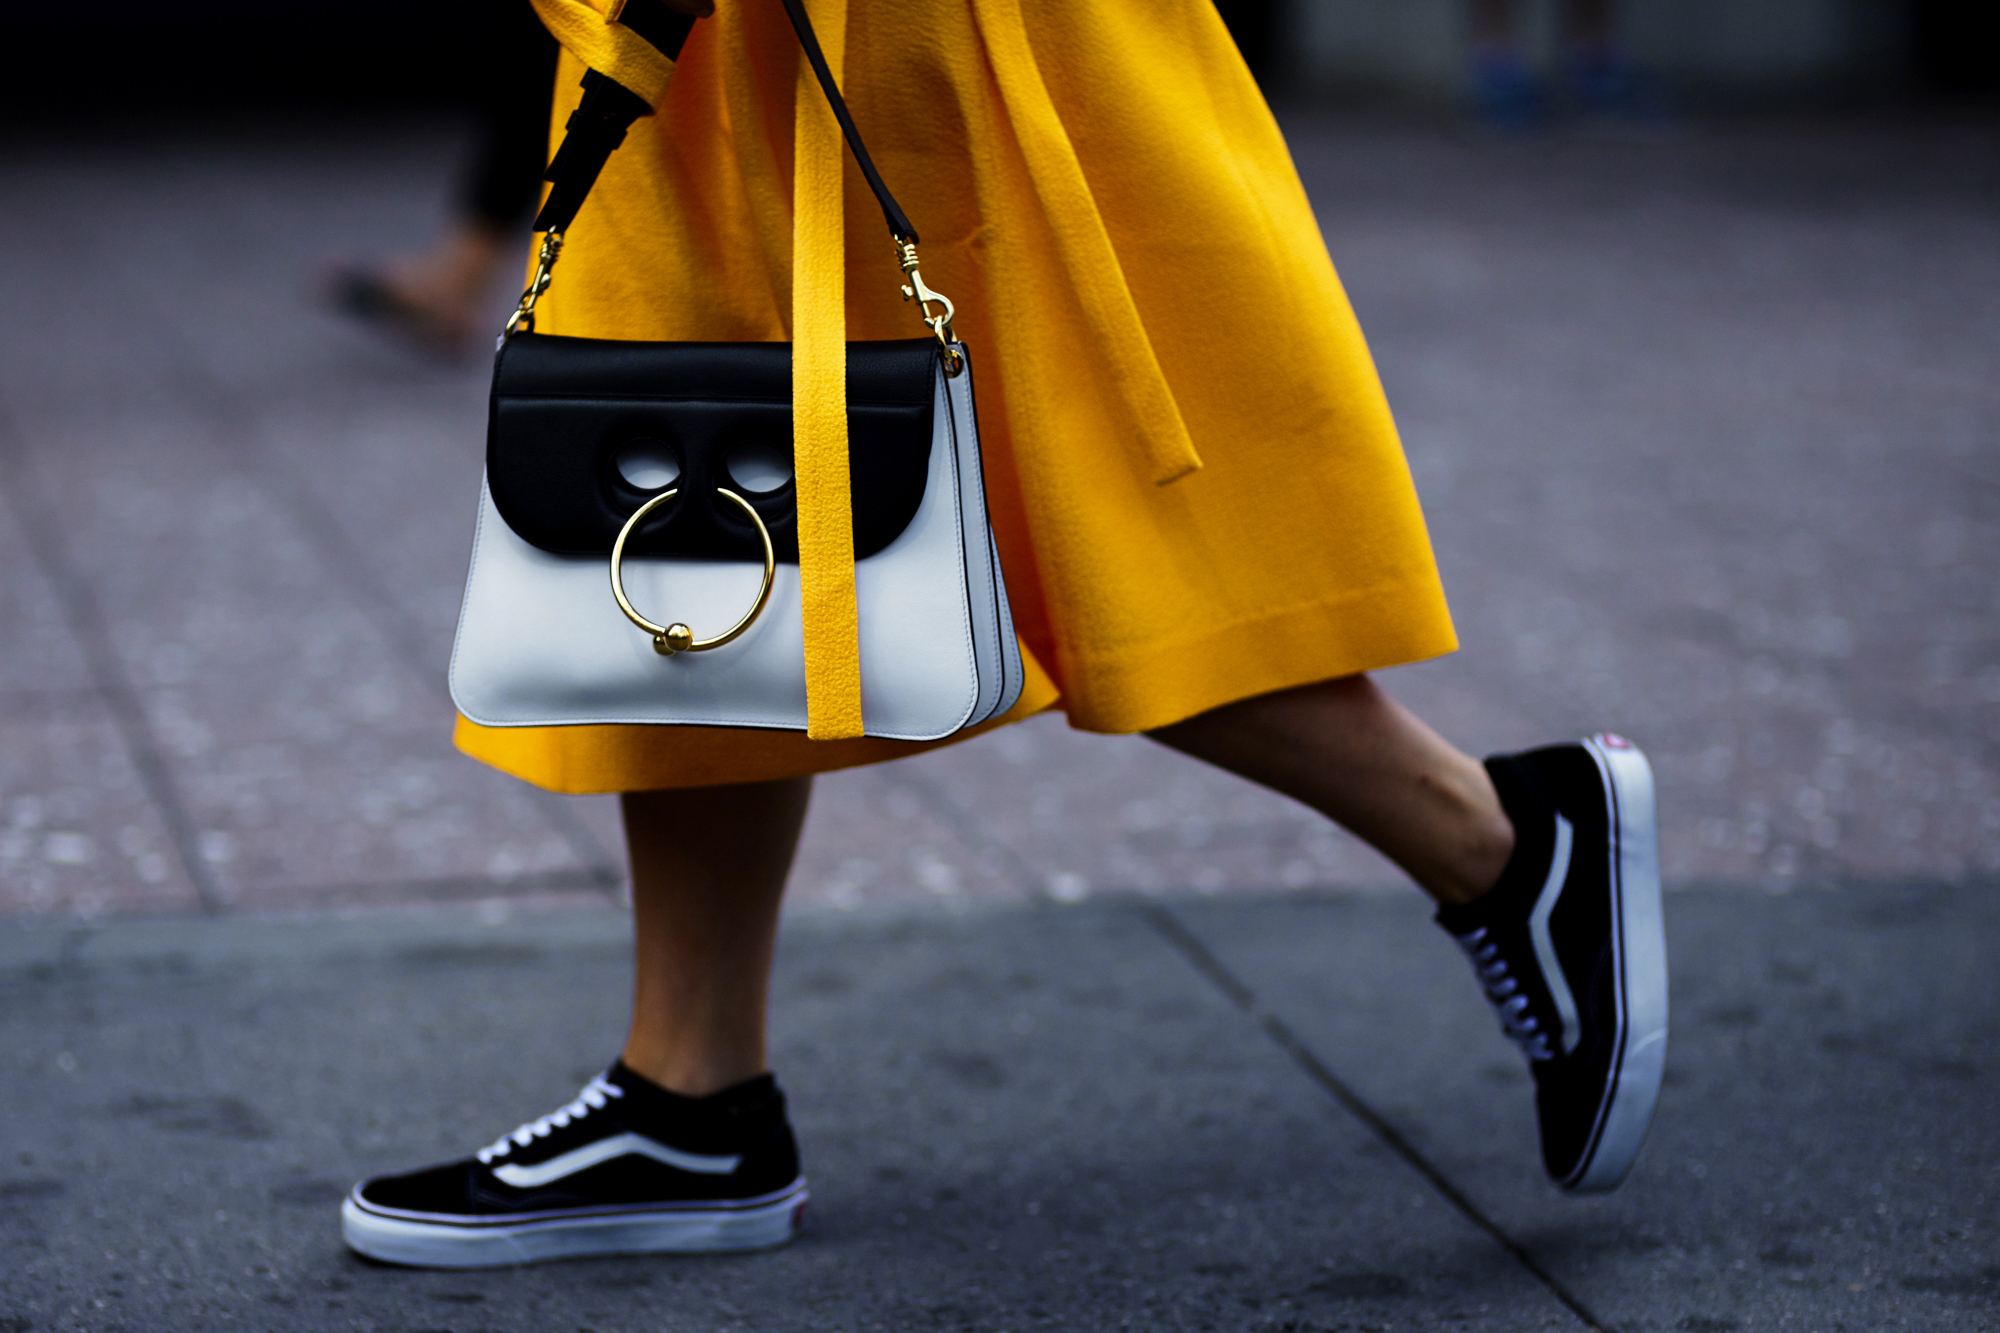 Kate Foley wearing a yellow dress, Vans sneakers and J.W.Anderson bag after a fashion show in New York City, September 2016